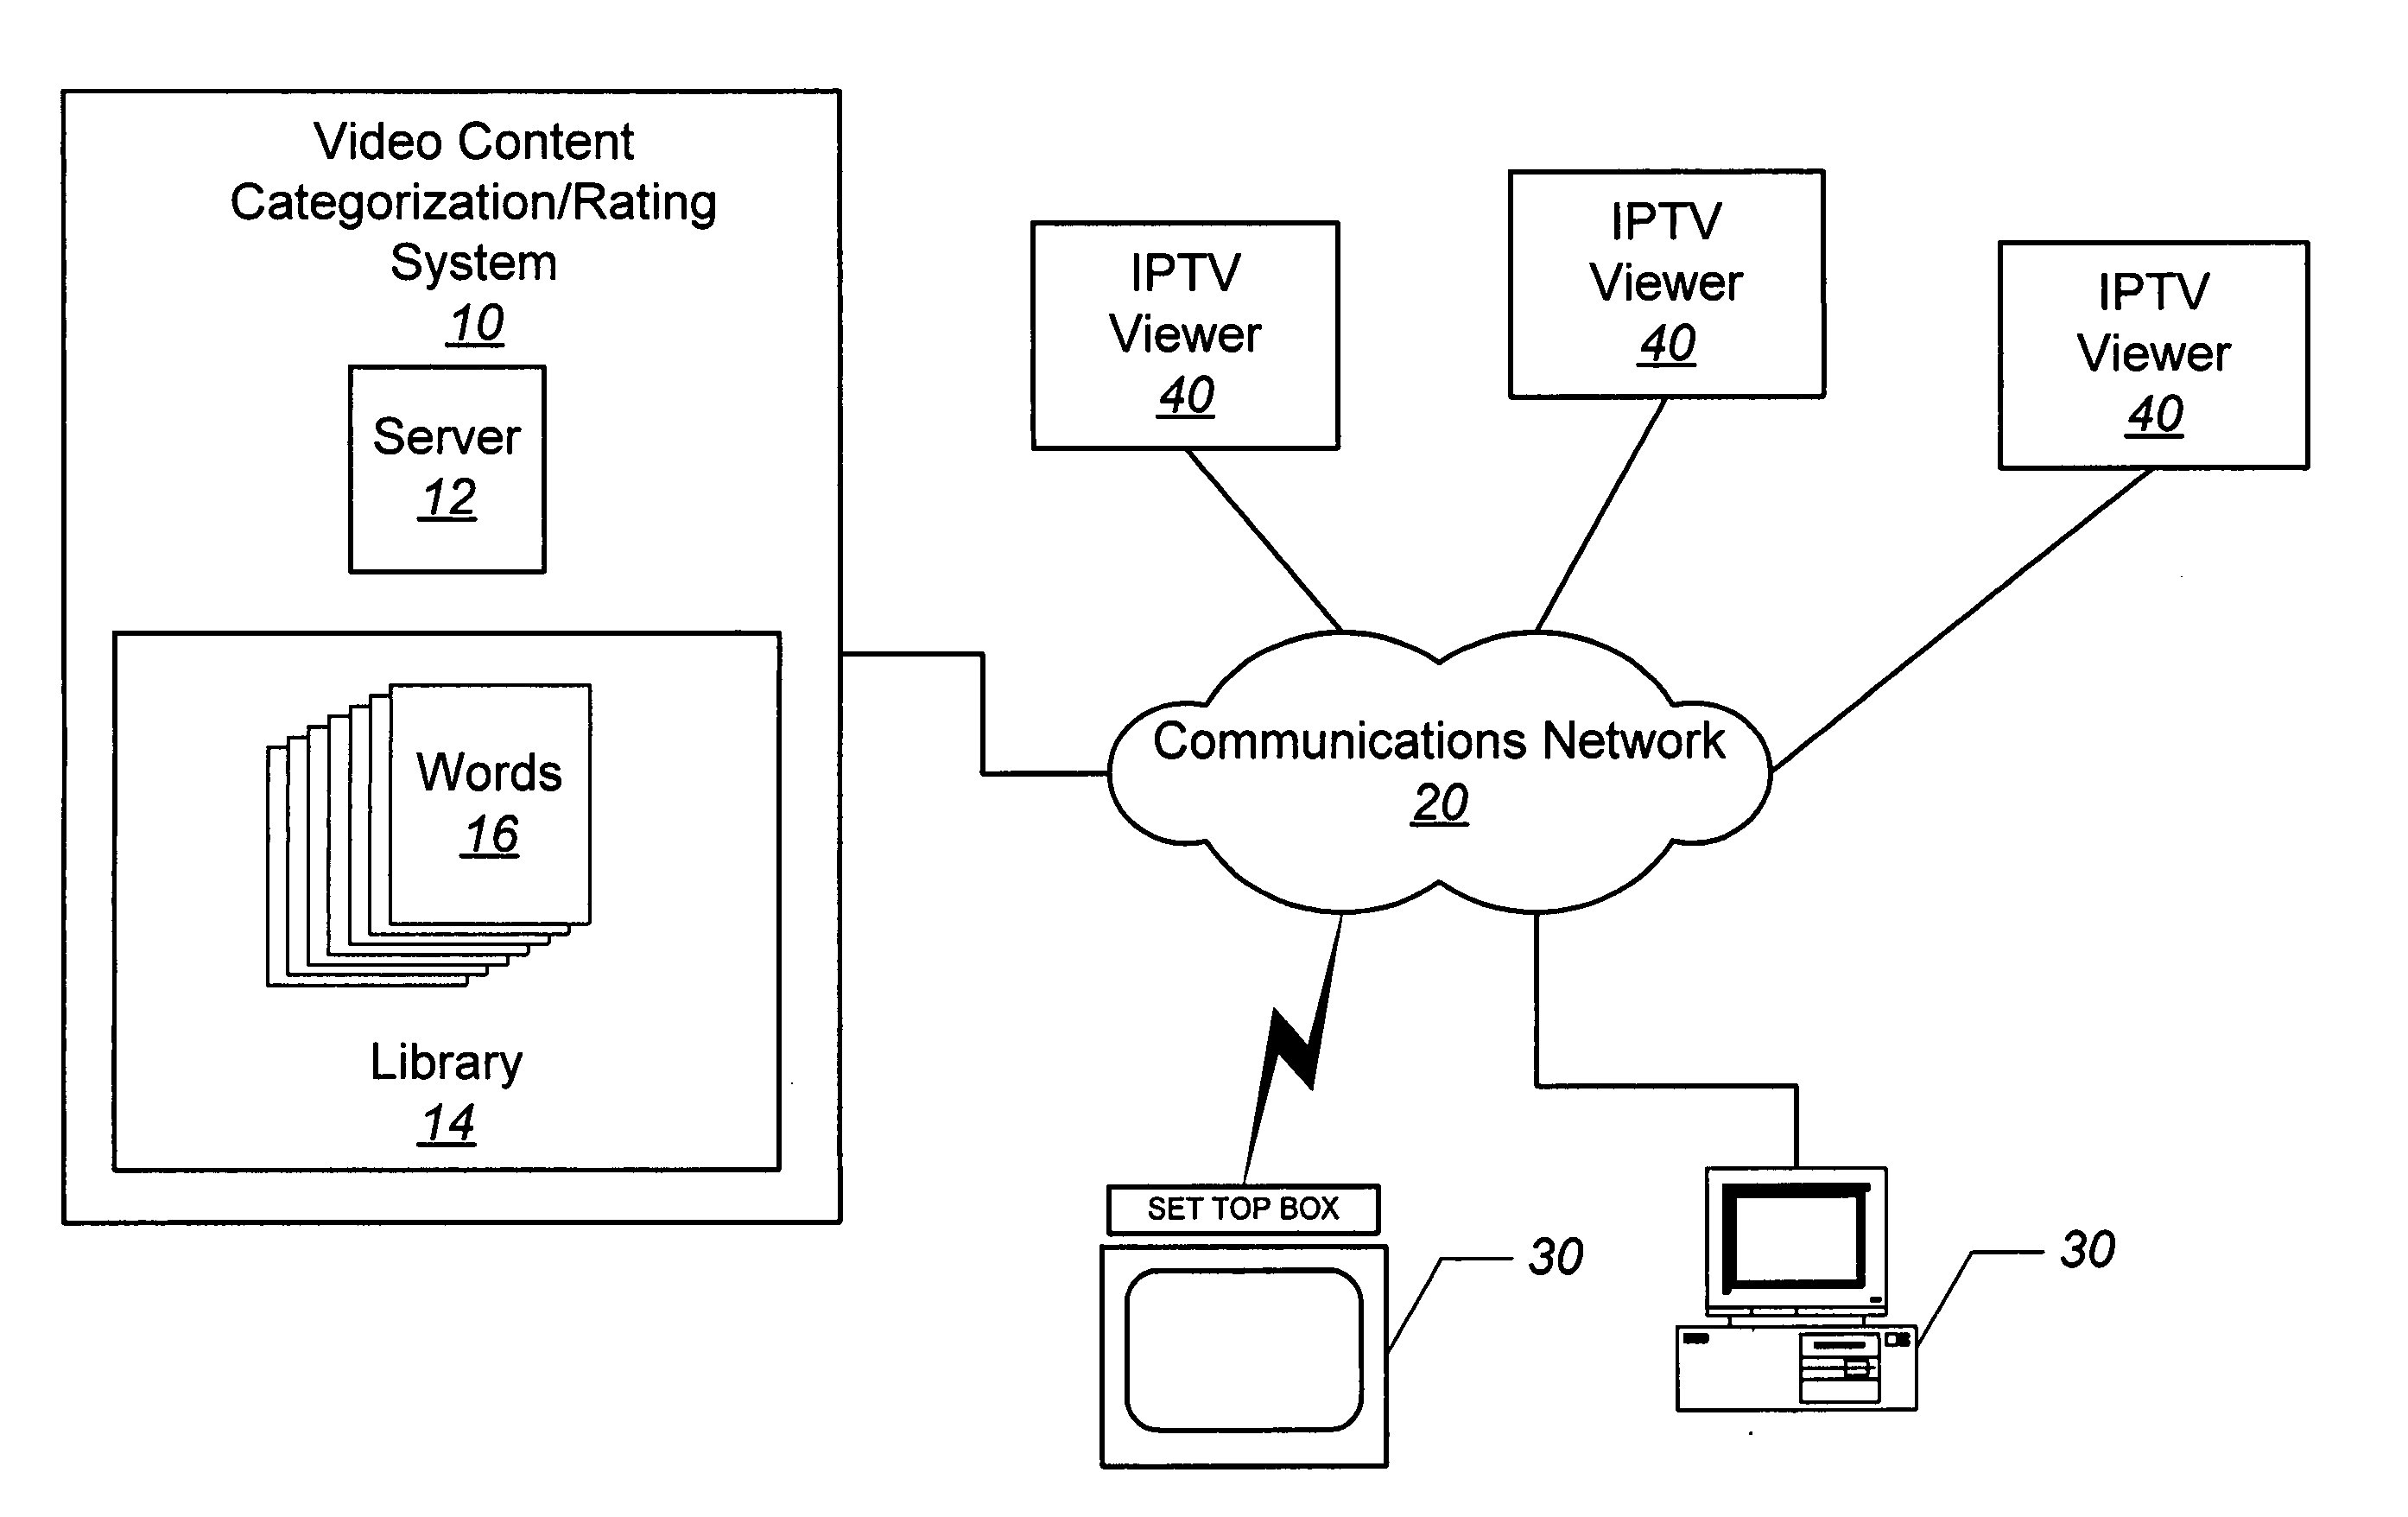 Methods, systems, and computer program products for categorizing/rating content uploaded to a network for broadcasting